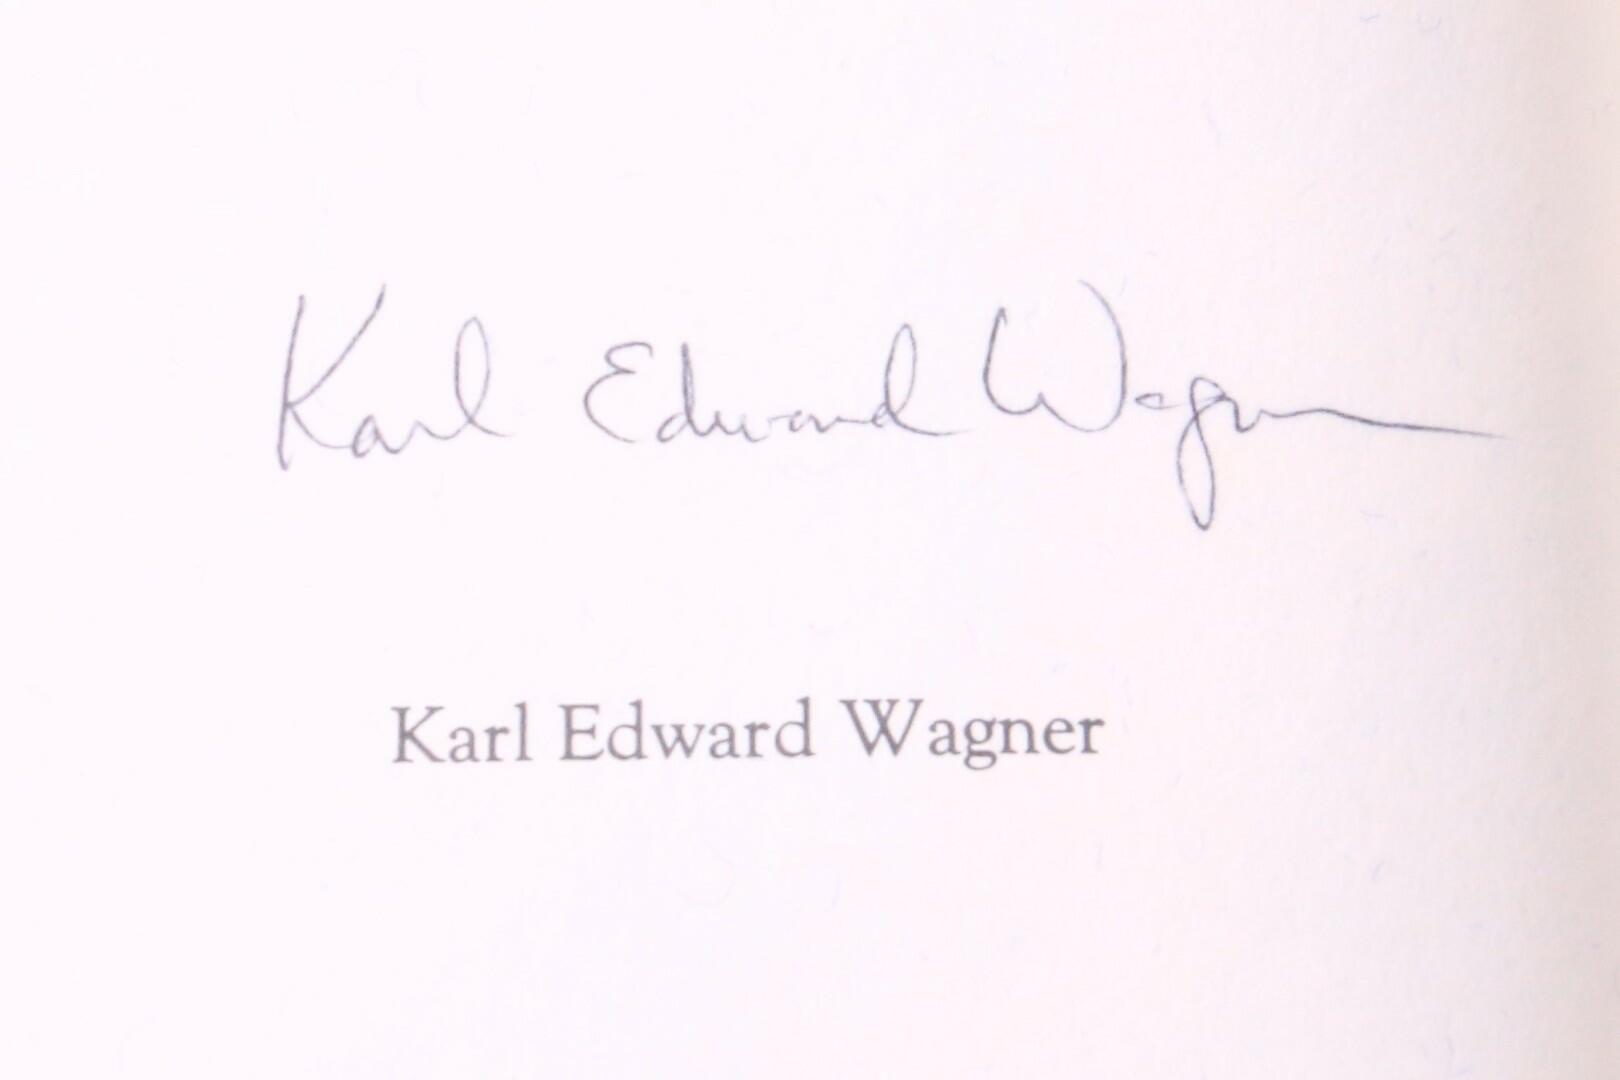 Karl Edward Wagner - The Book of Kane - Grant, 1985, Signed Limited Edition.